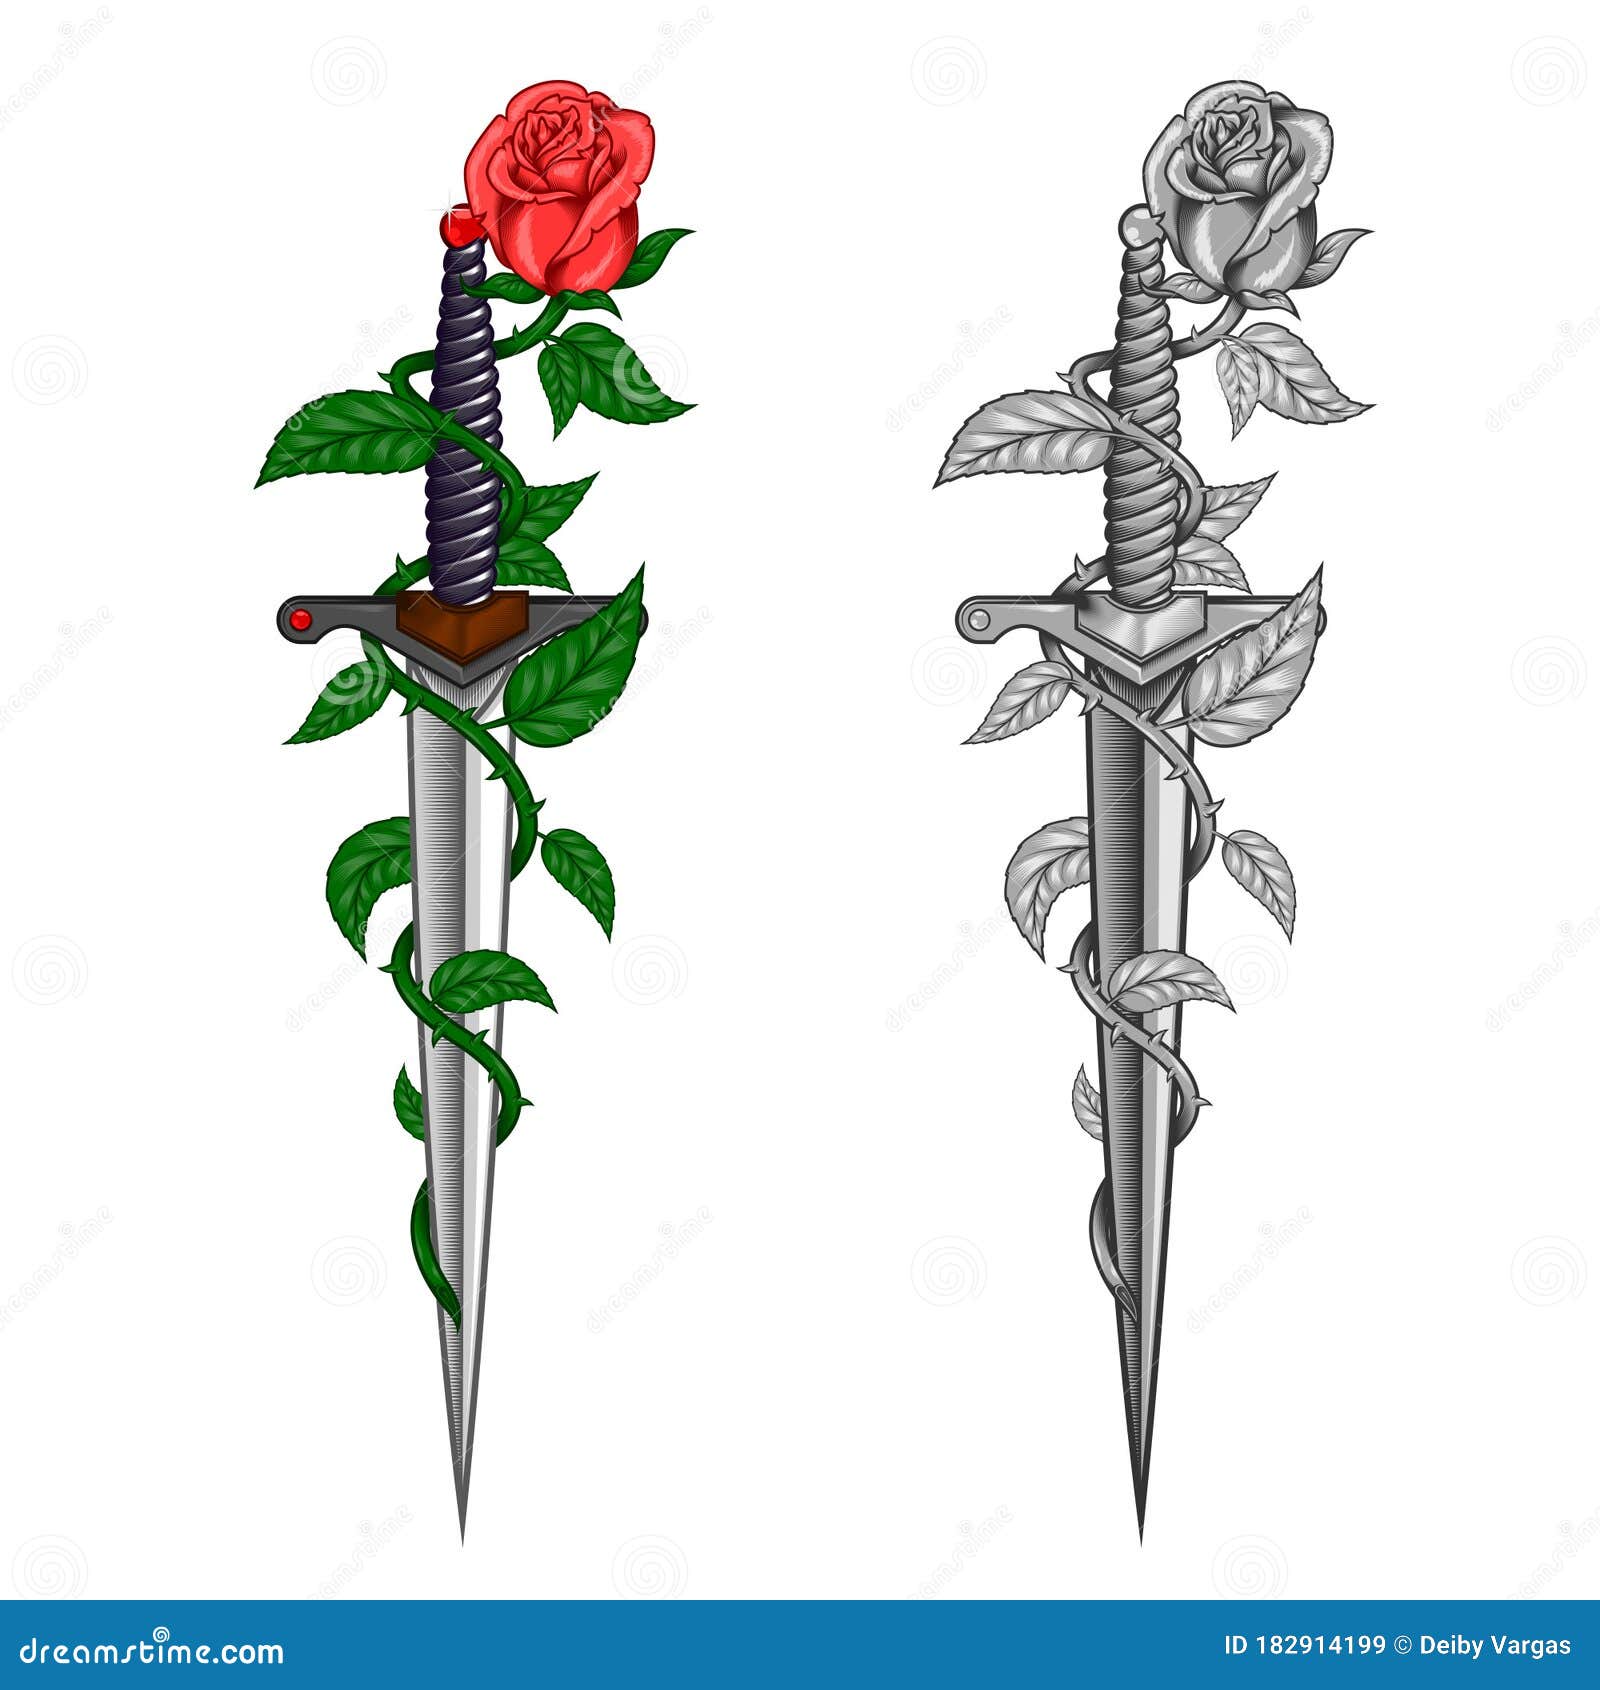 Knife and burning rose tattoo  Tattoogridnet